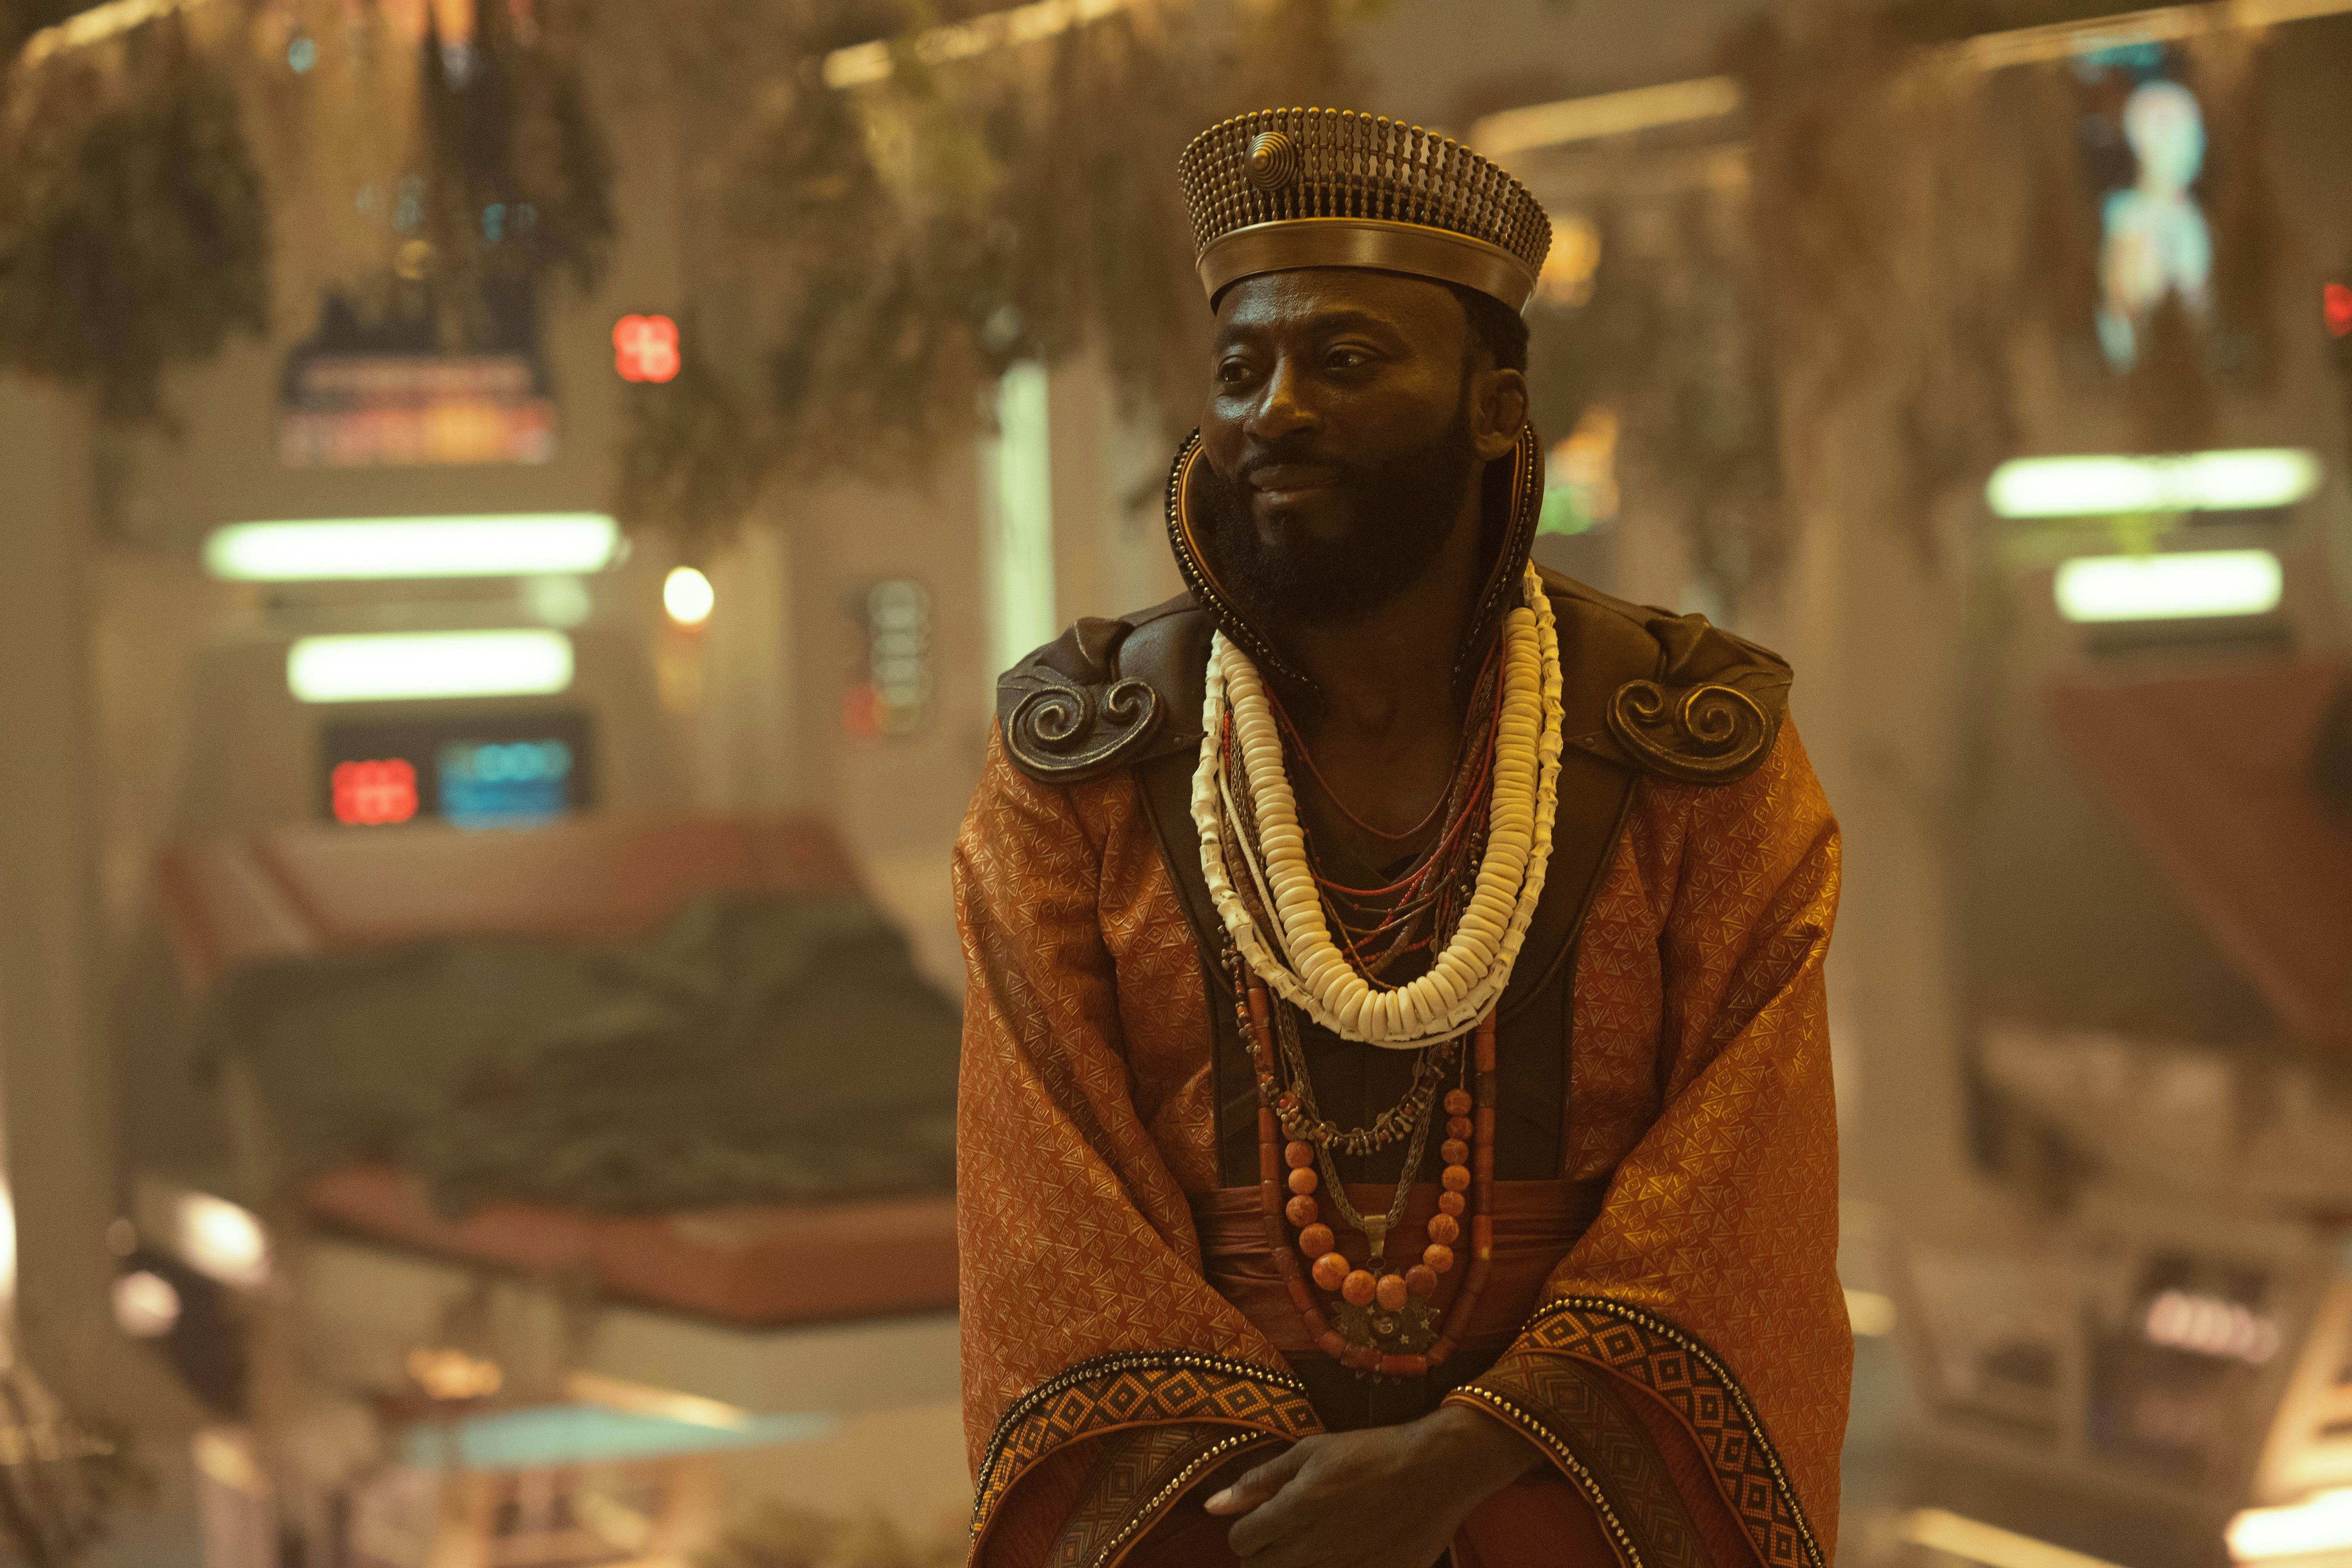 Dr. M'Benga (Babs Olusanmokun) stands in sickbay, wearing a crown and robe.